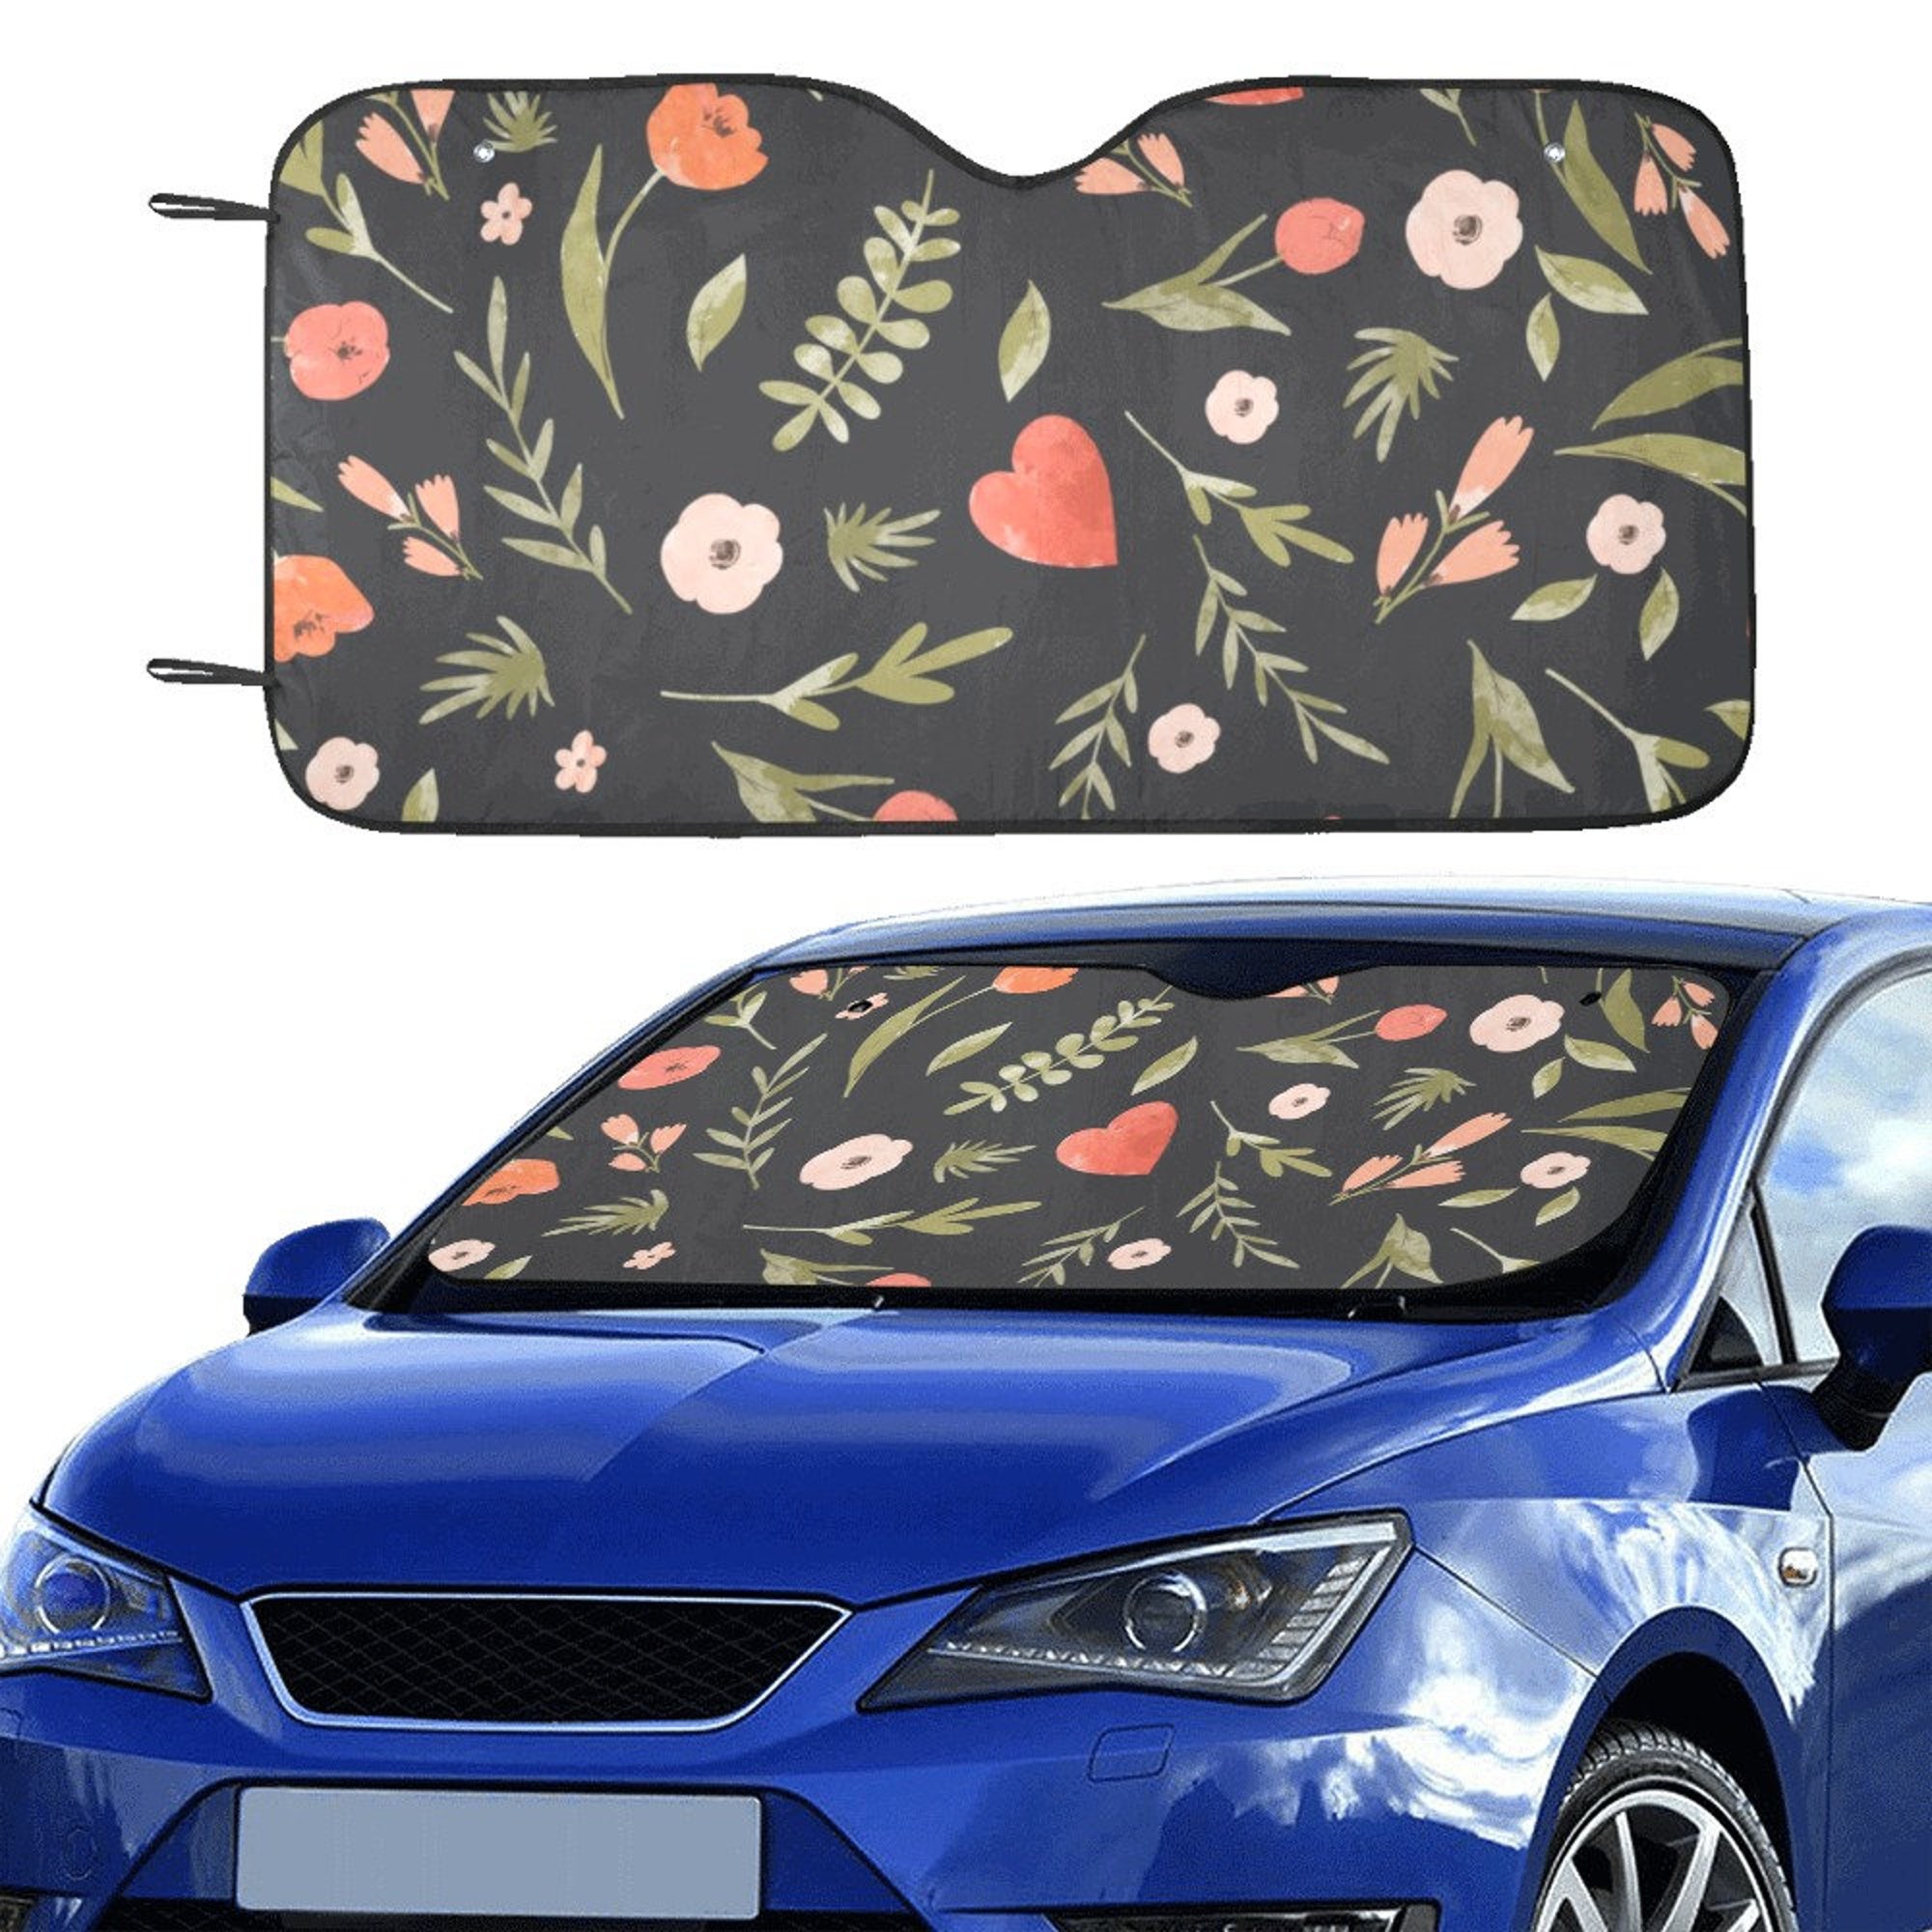 Discover Witchy floral ritual Car sunshade for windshield